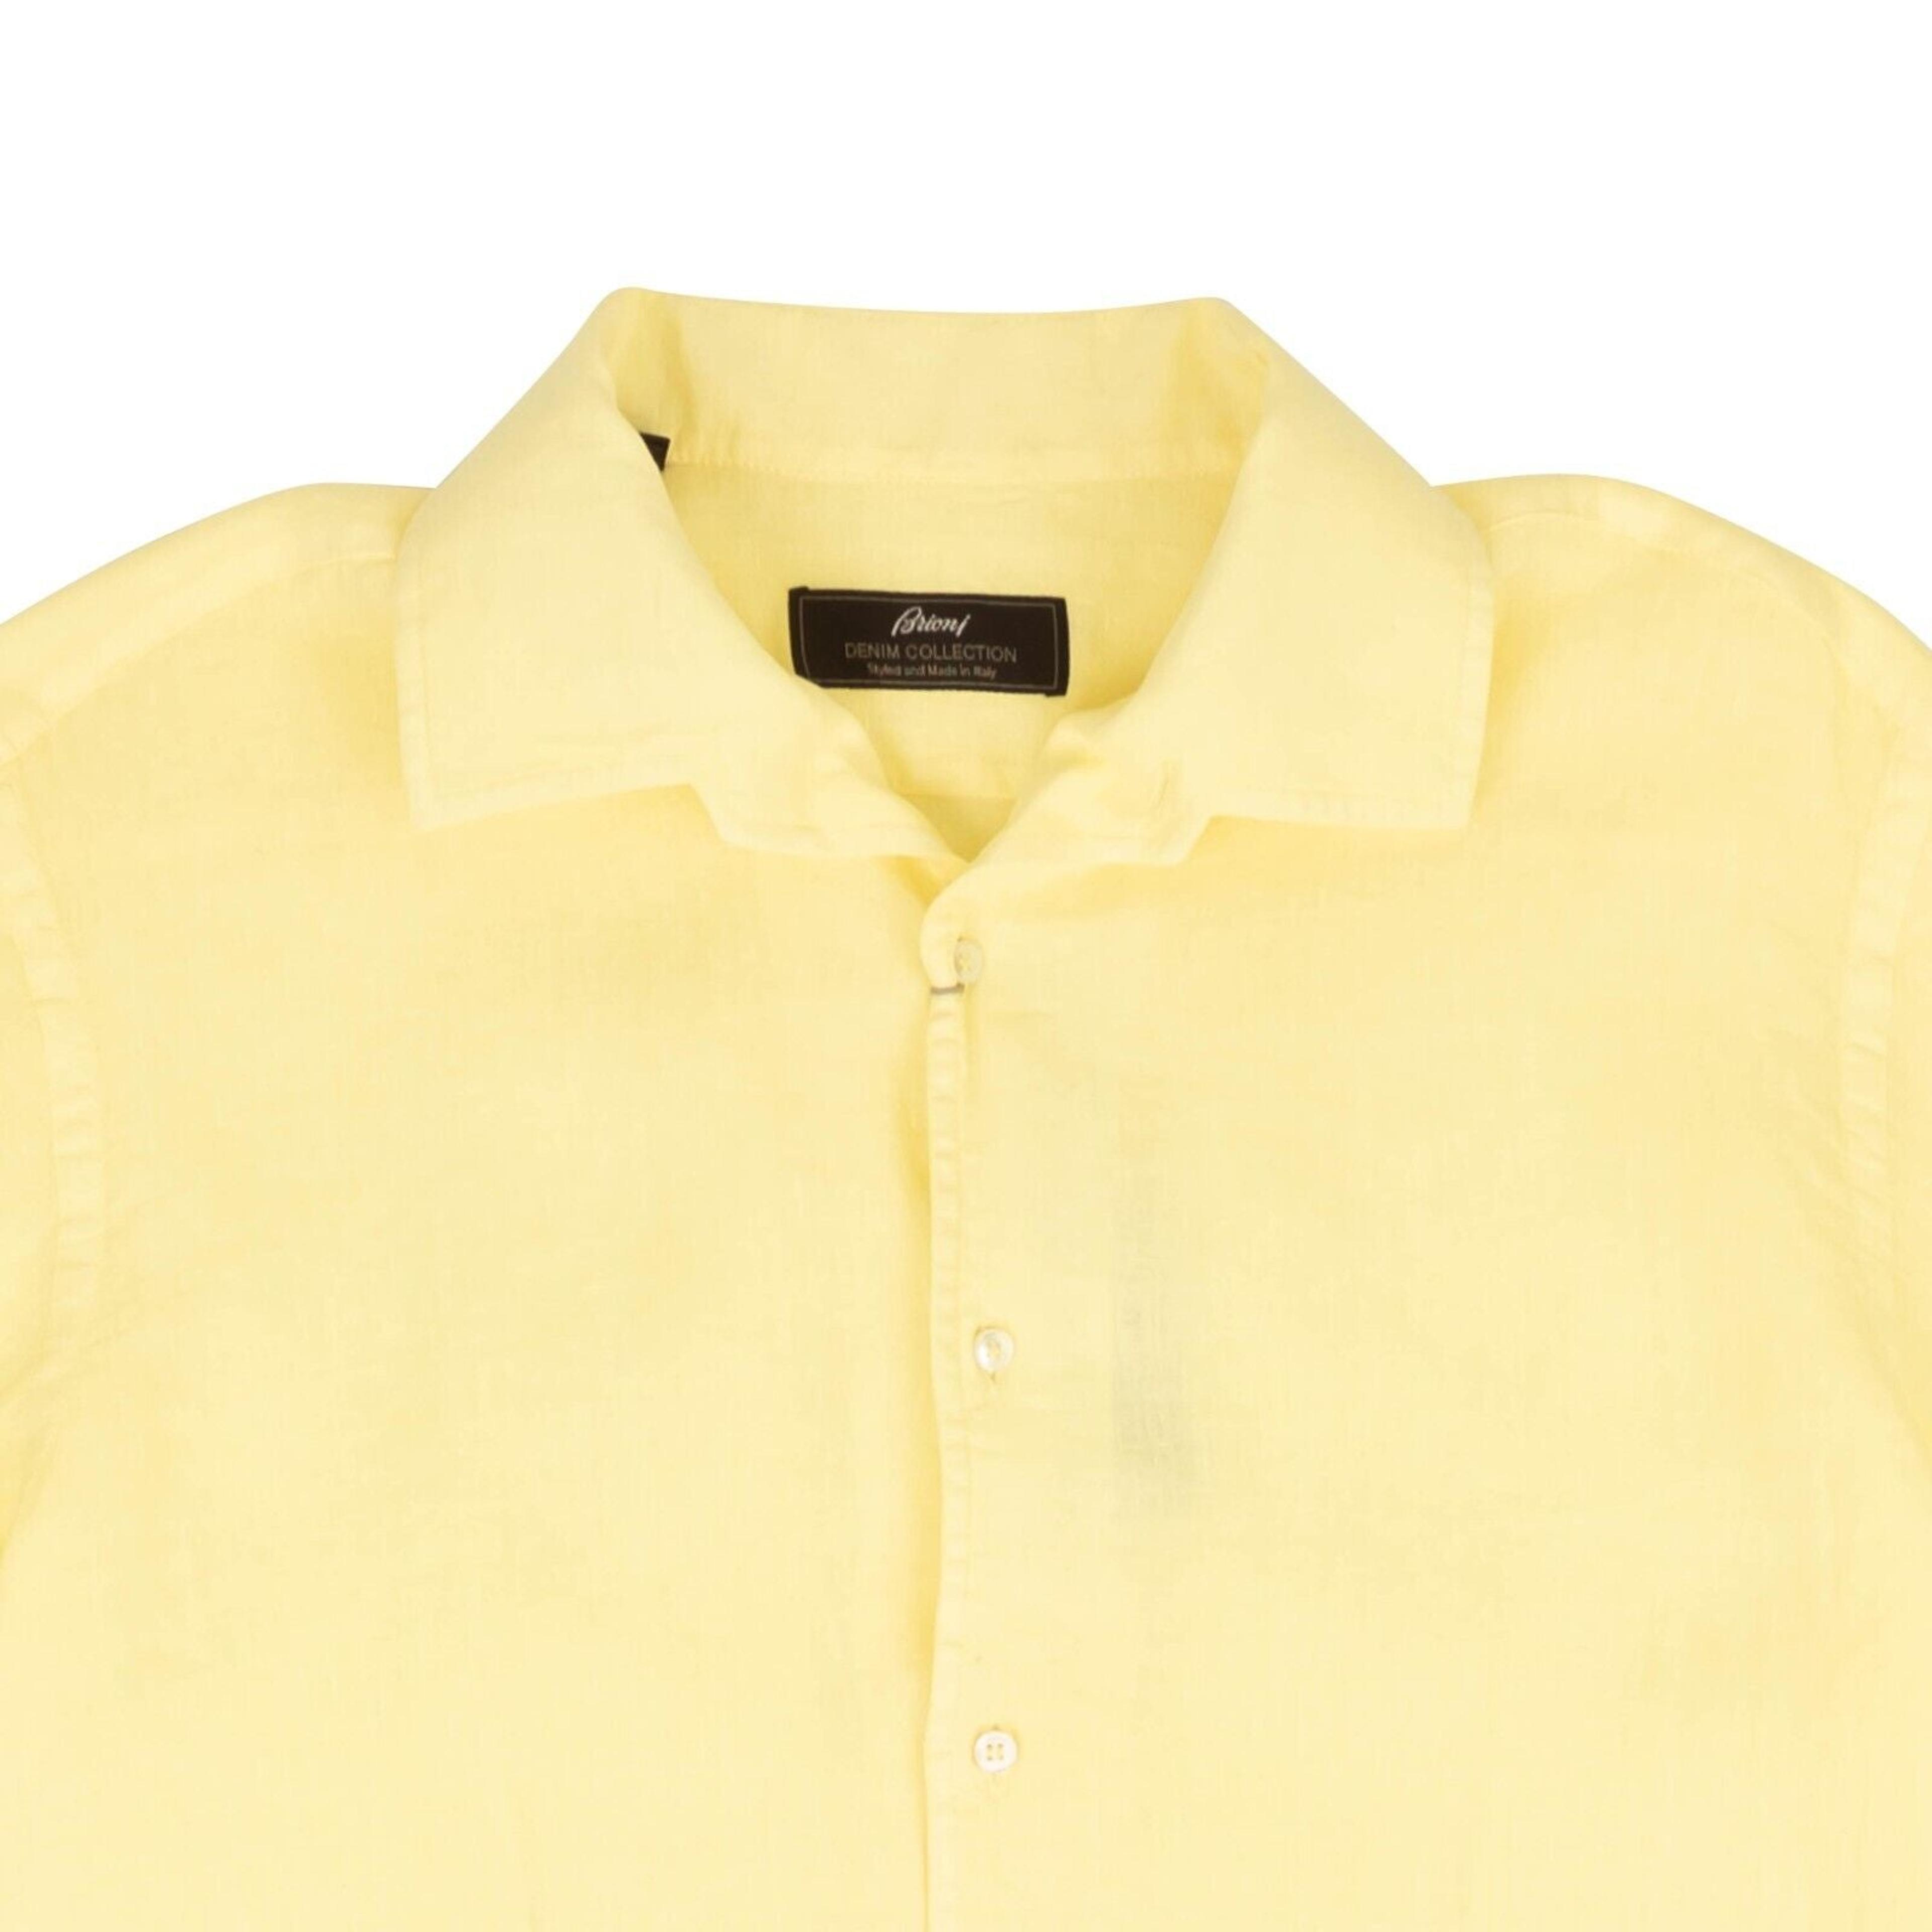 Alternate View 1 of Yellow Slim-Fit Short Sleeve Button Down Shirt